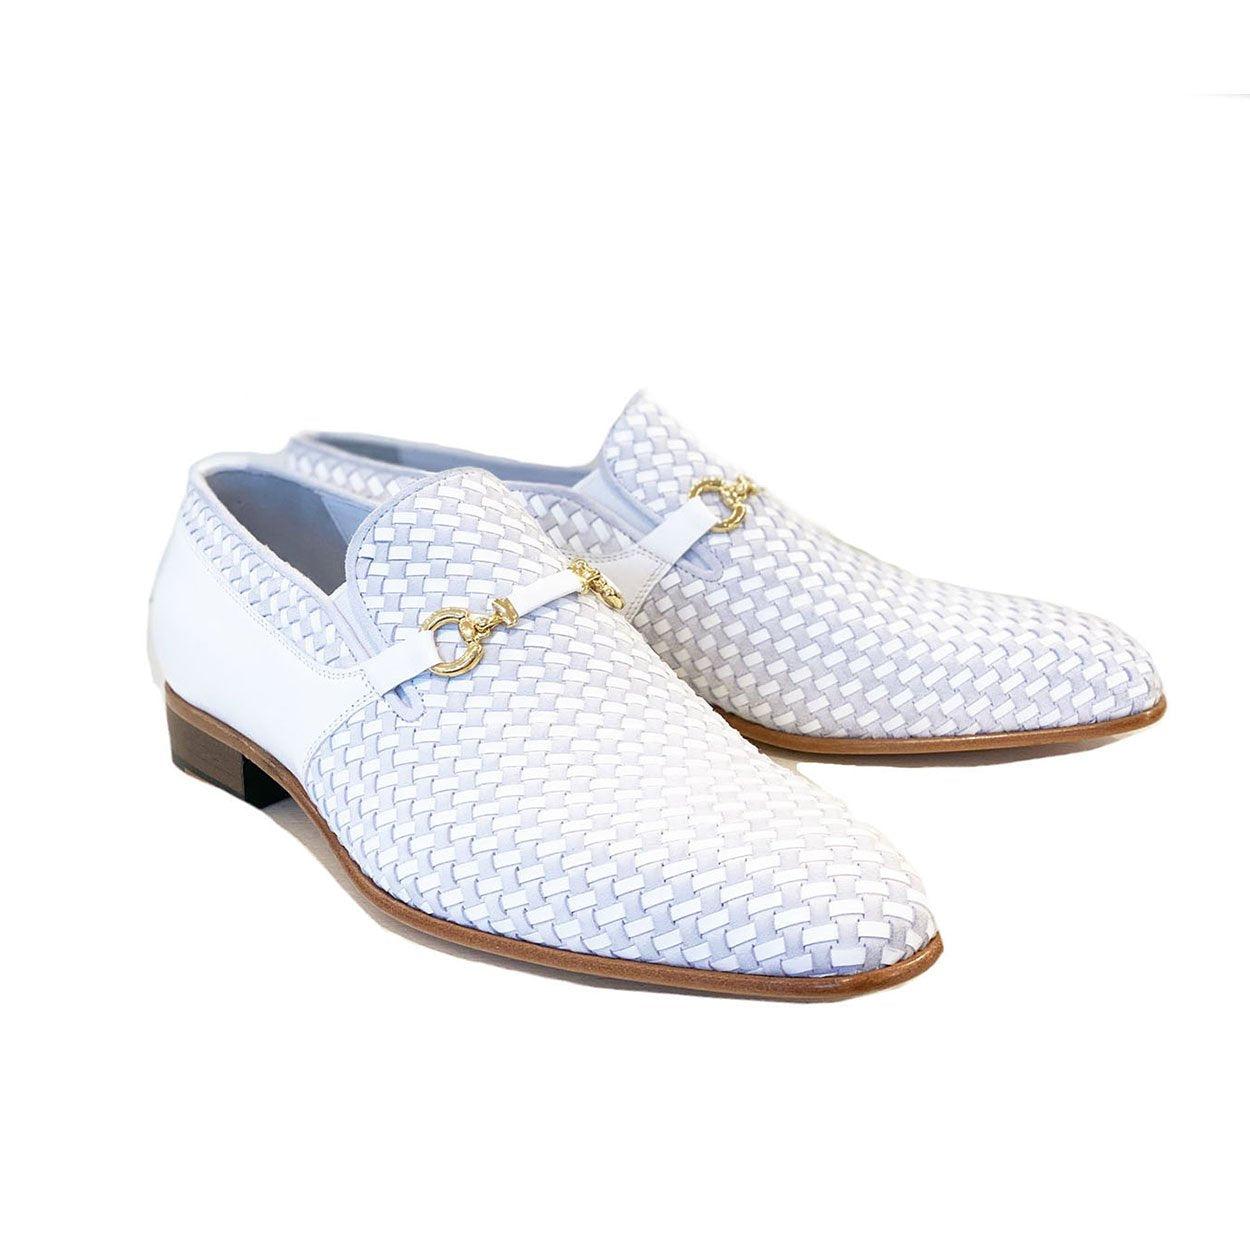 Corrente C0221 5776 Shoes Two Tone Woven Calf-skin Leather 